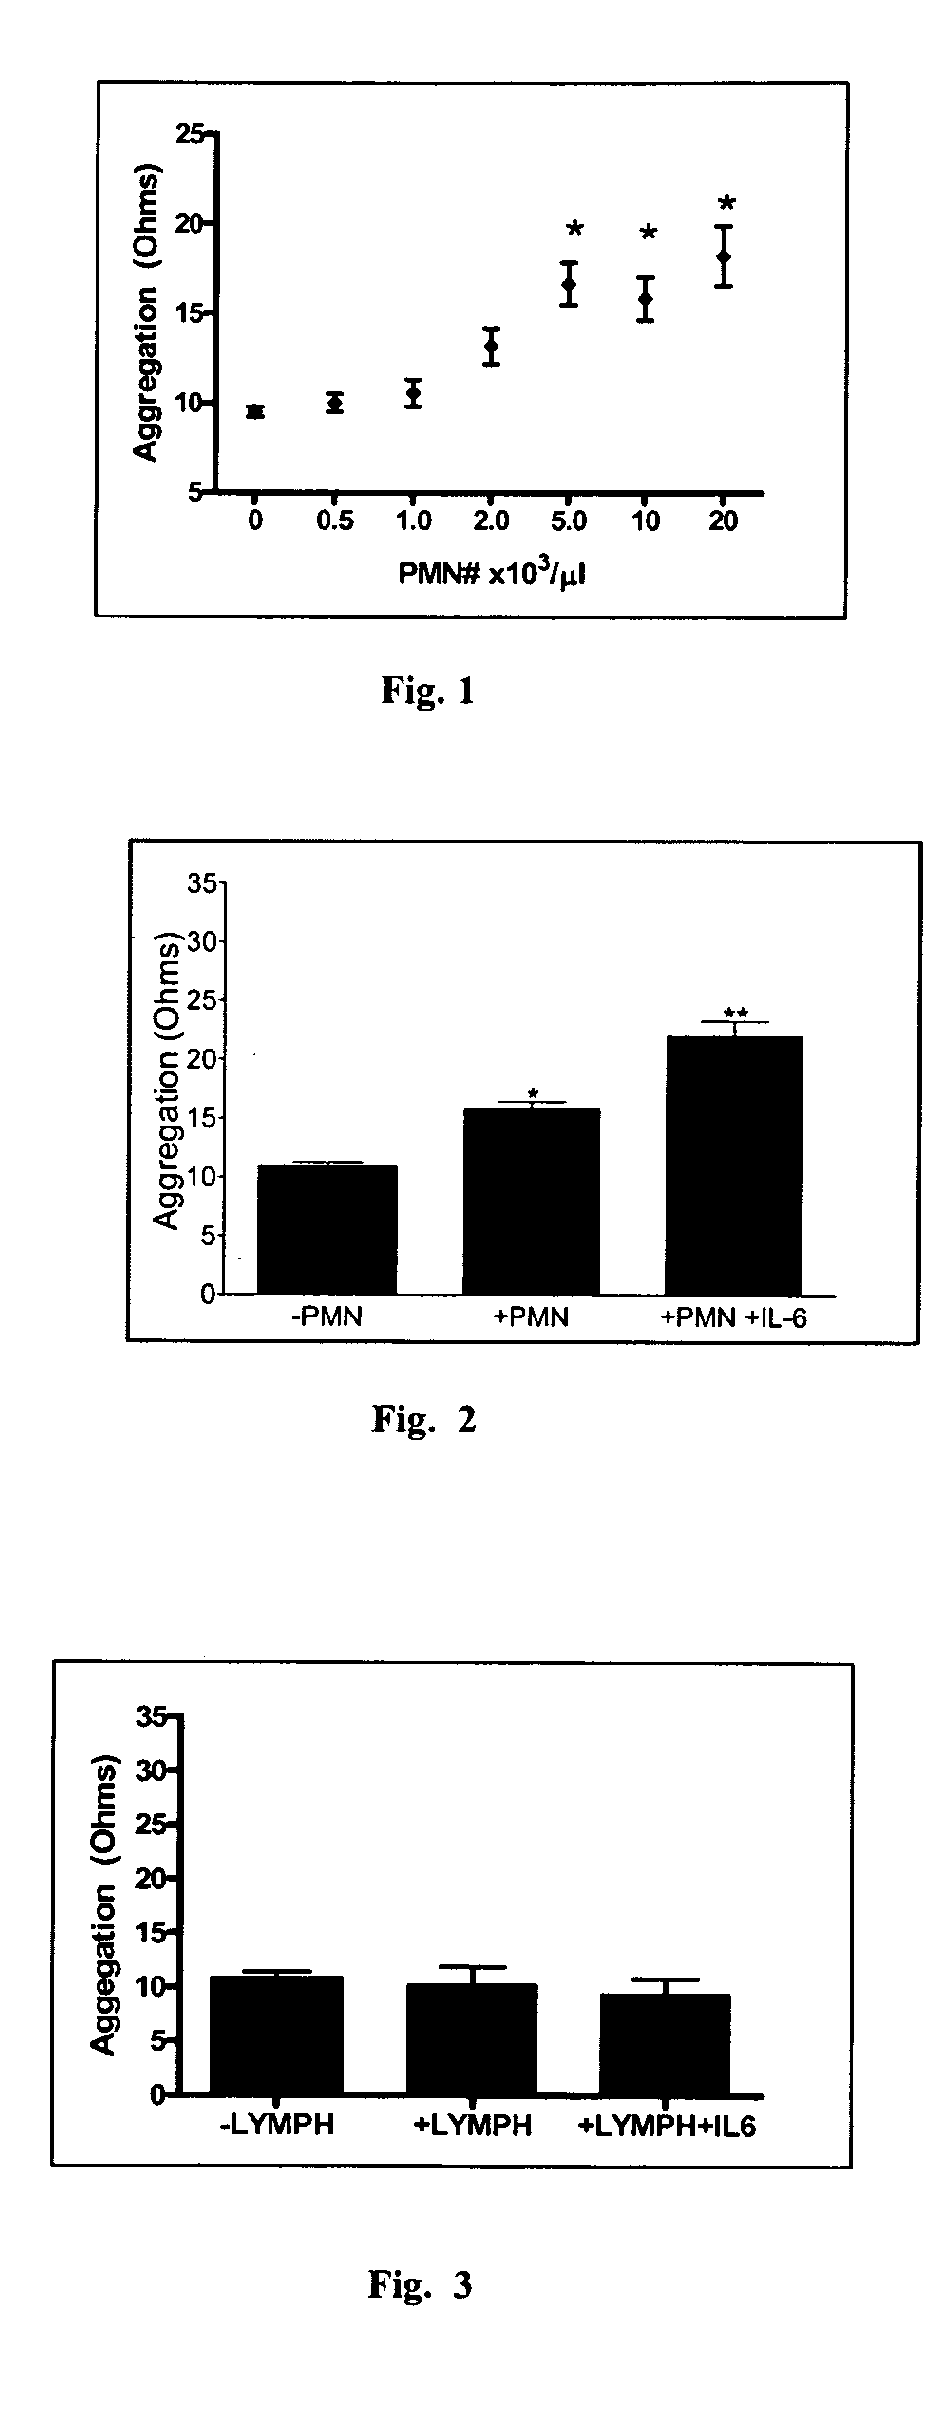 Method of inhibiting platelet aggregation and clot formation